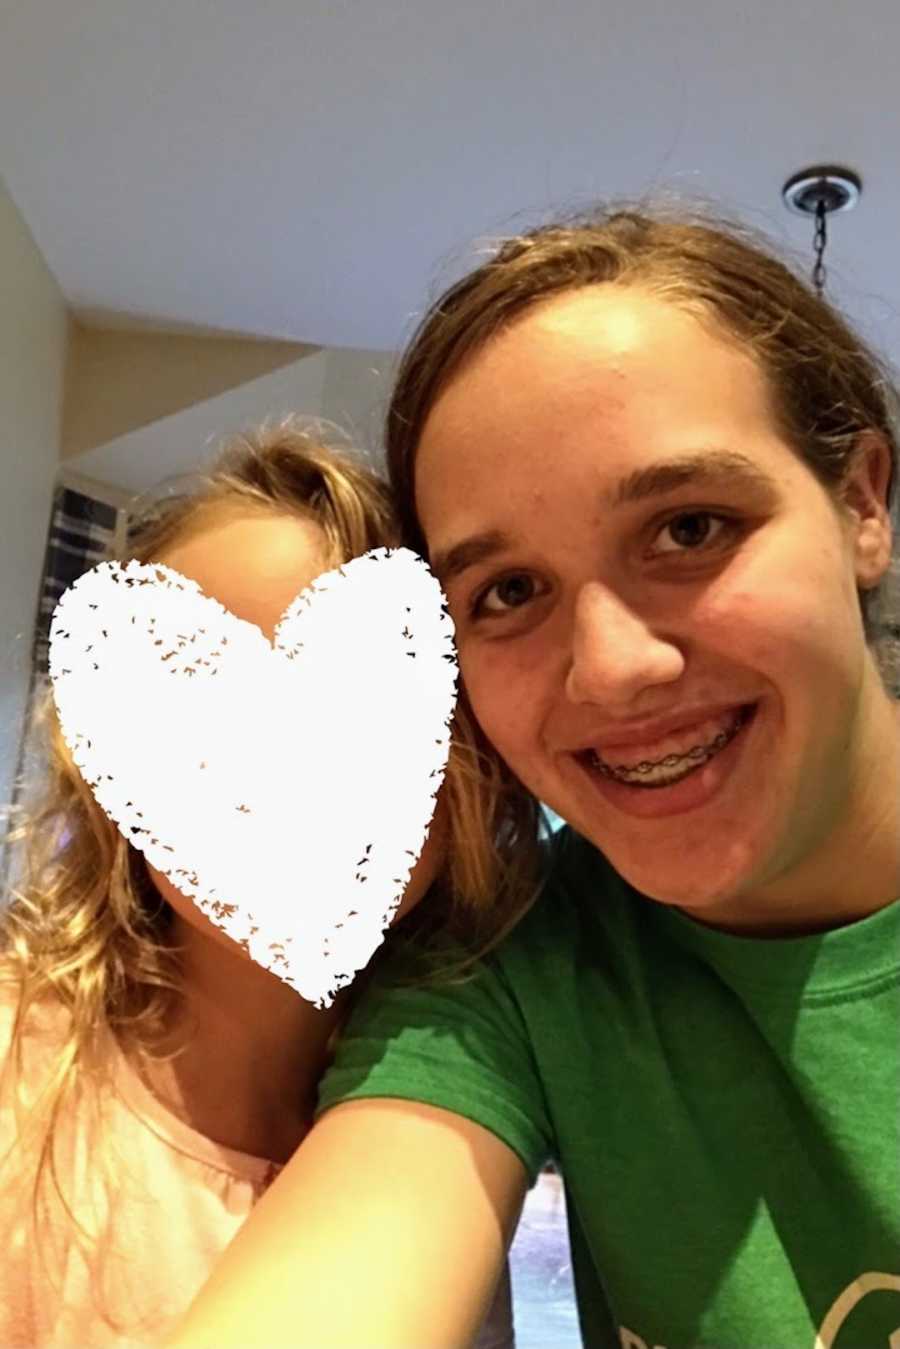 Young girl taking smiling selfie with foster sister